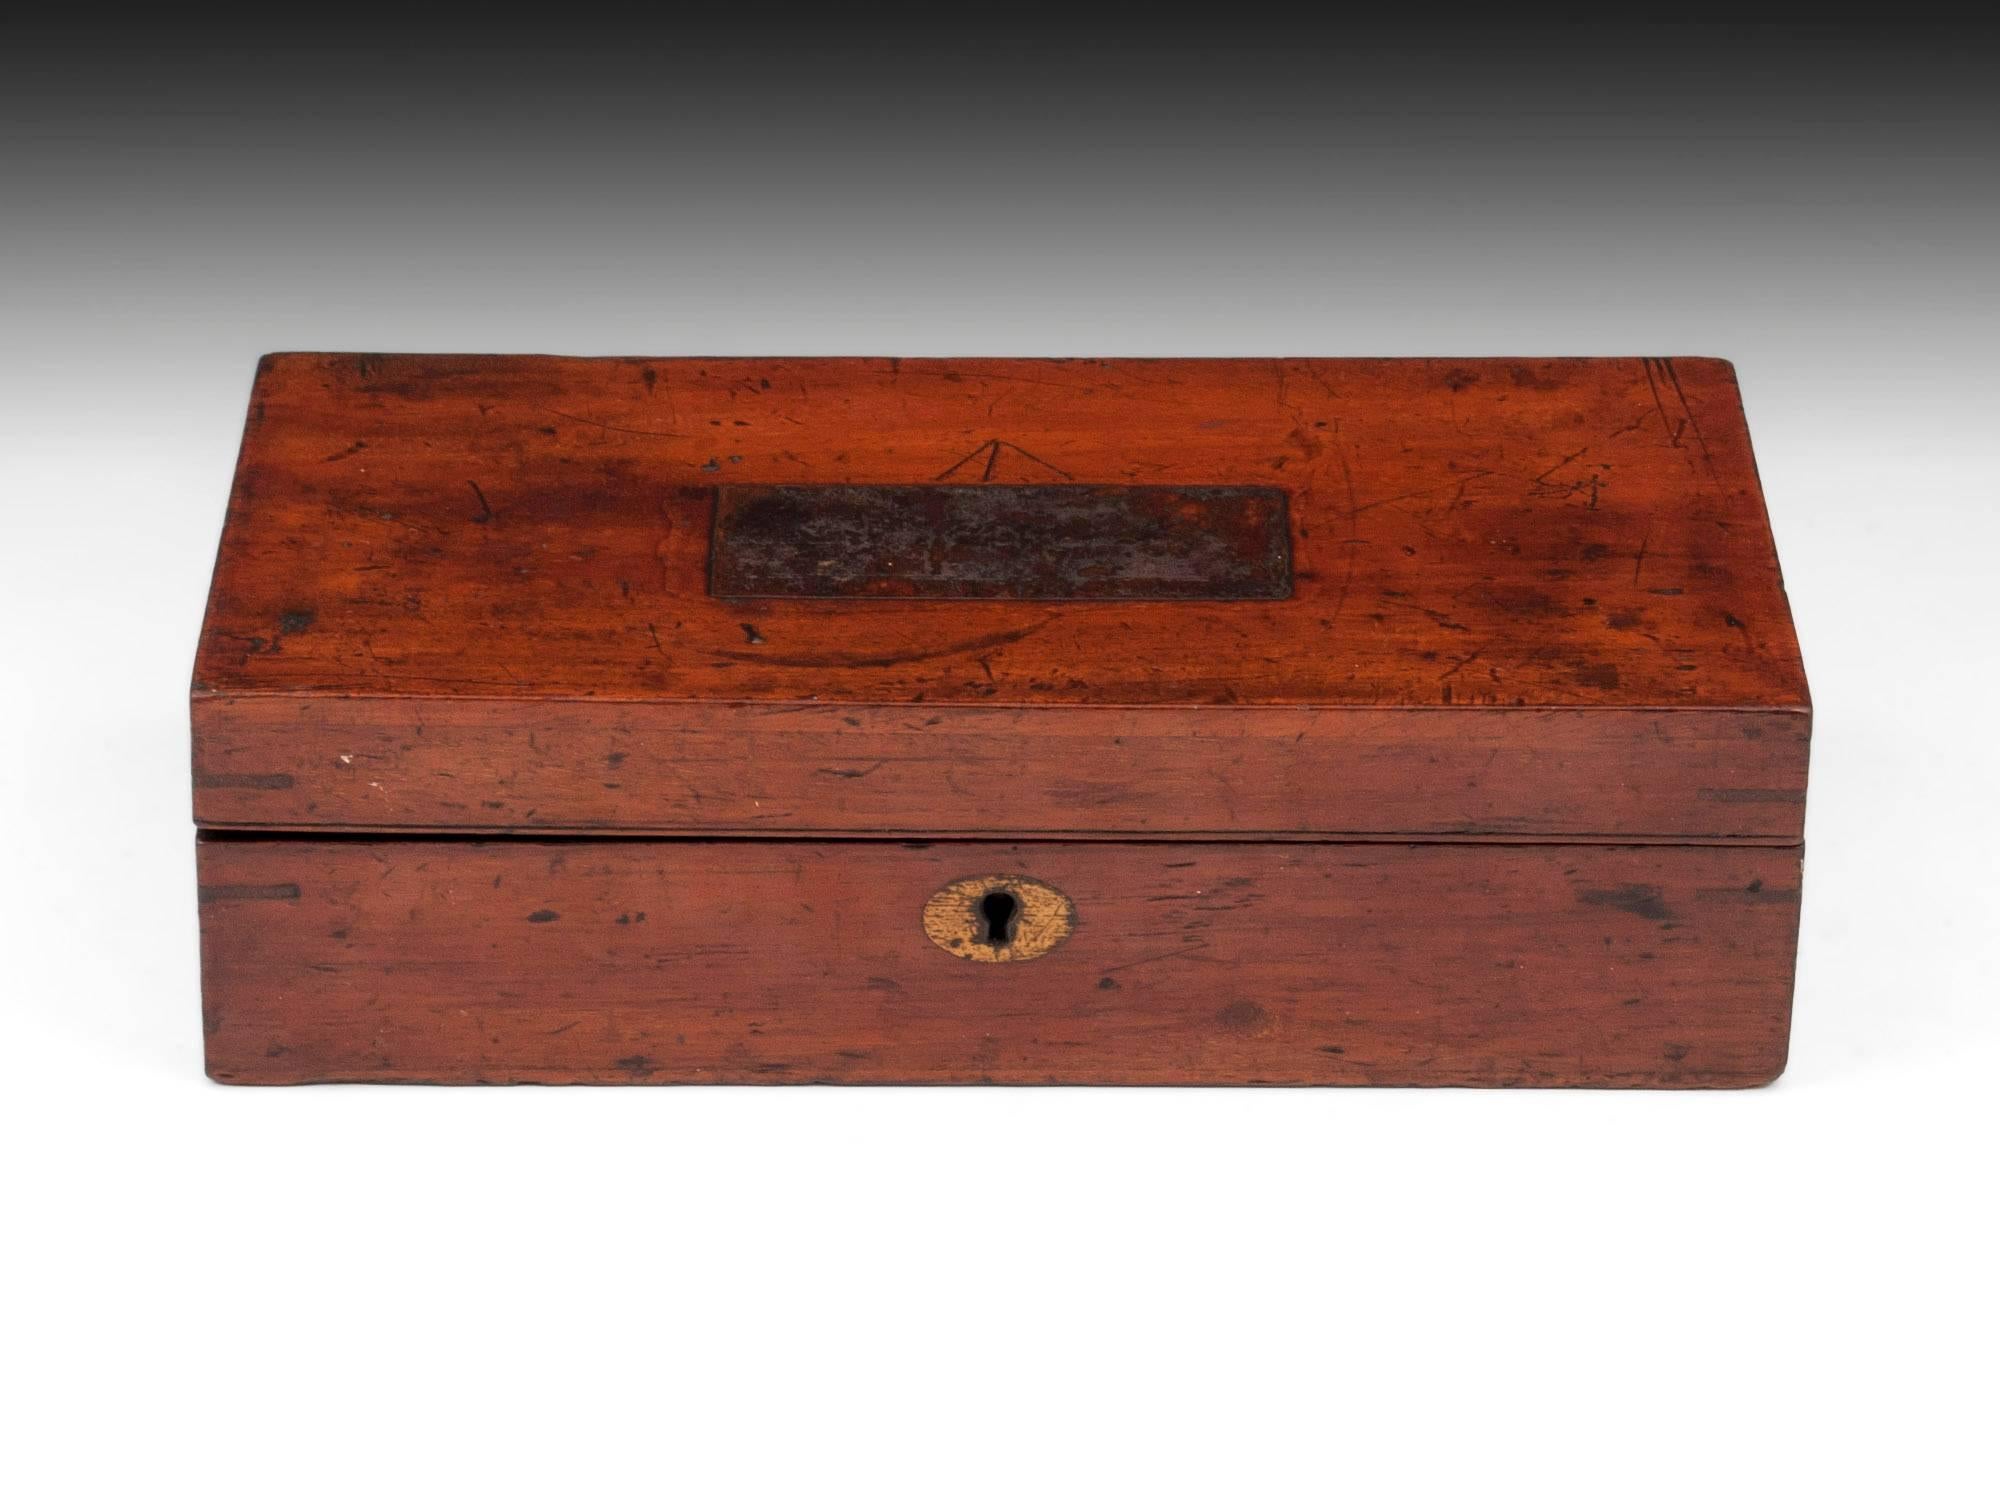 Antique Arnold & Sons stomach pump and Enema set housed in a mahogany box with a padded lined lid to hold the components secure during transit. 

The pump has a main embossed label which reads: 
Arnold & Sons 31, West Smithfield, 1.2.3. Ciltspur